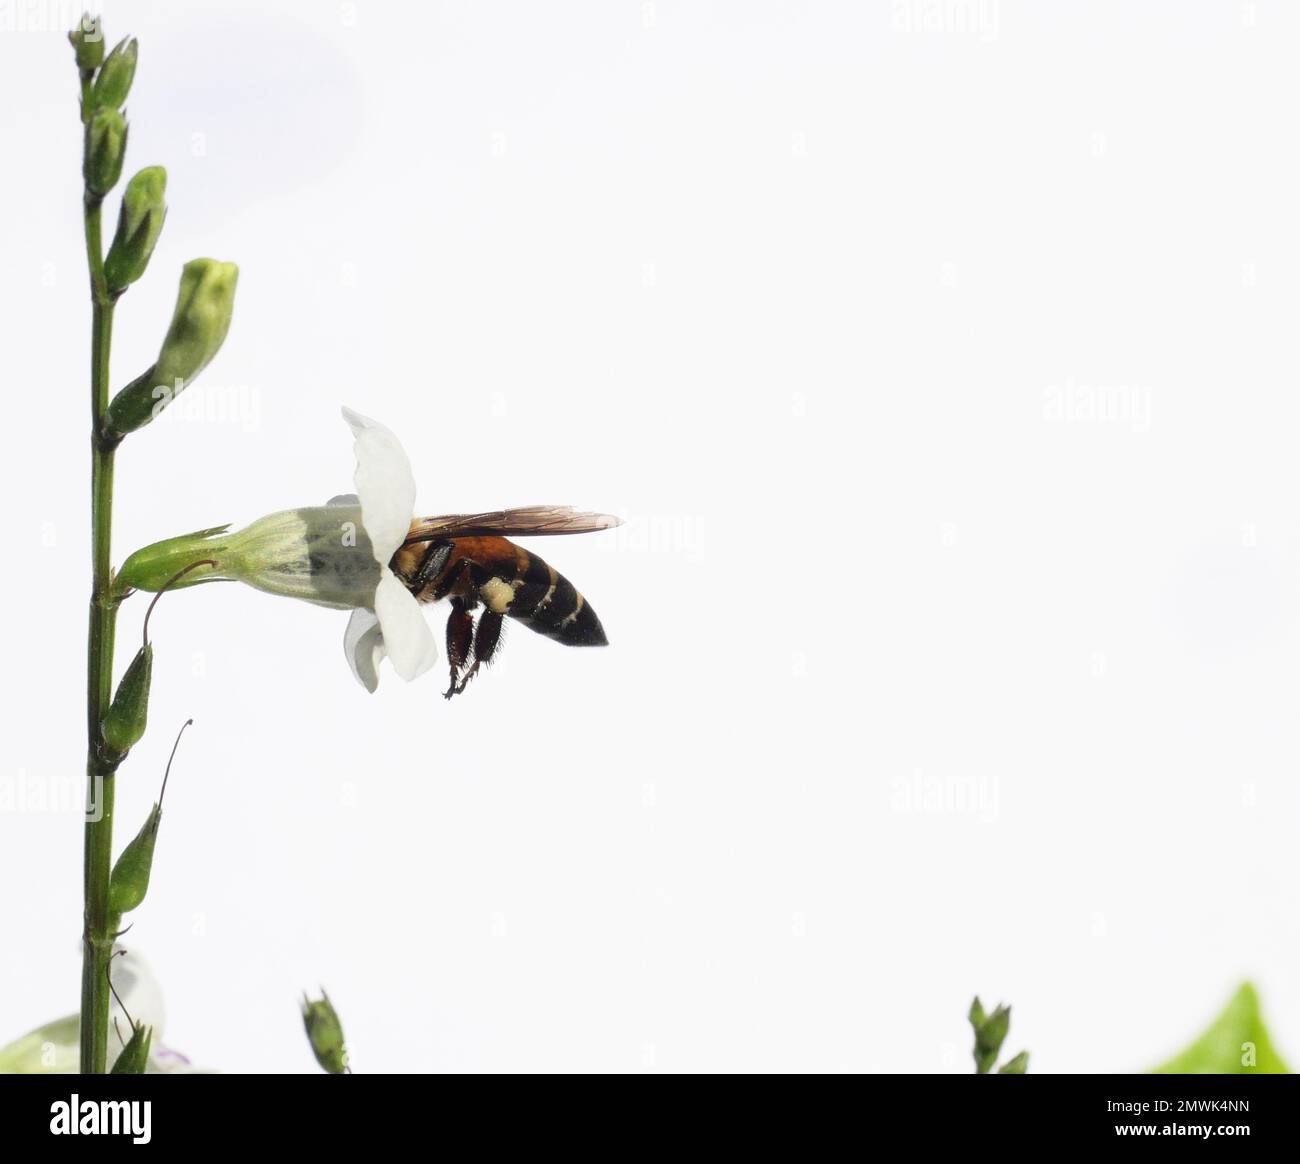 Giant honey bee seeking nectar on white Chinese violet or coromandel or creeping foxglove ( Asystasia gangetica ) blossom in field isolated Stock Photo